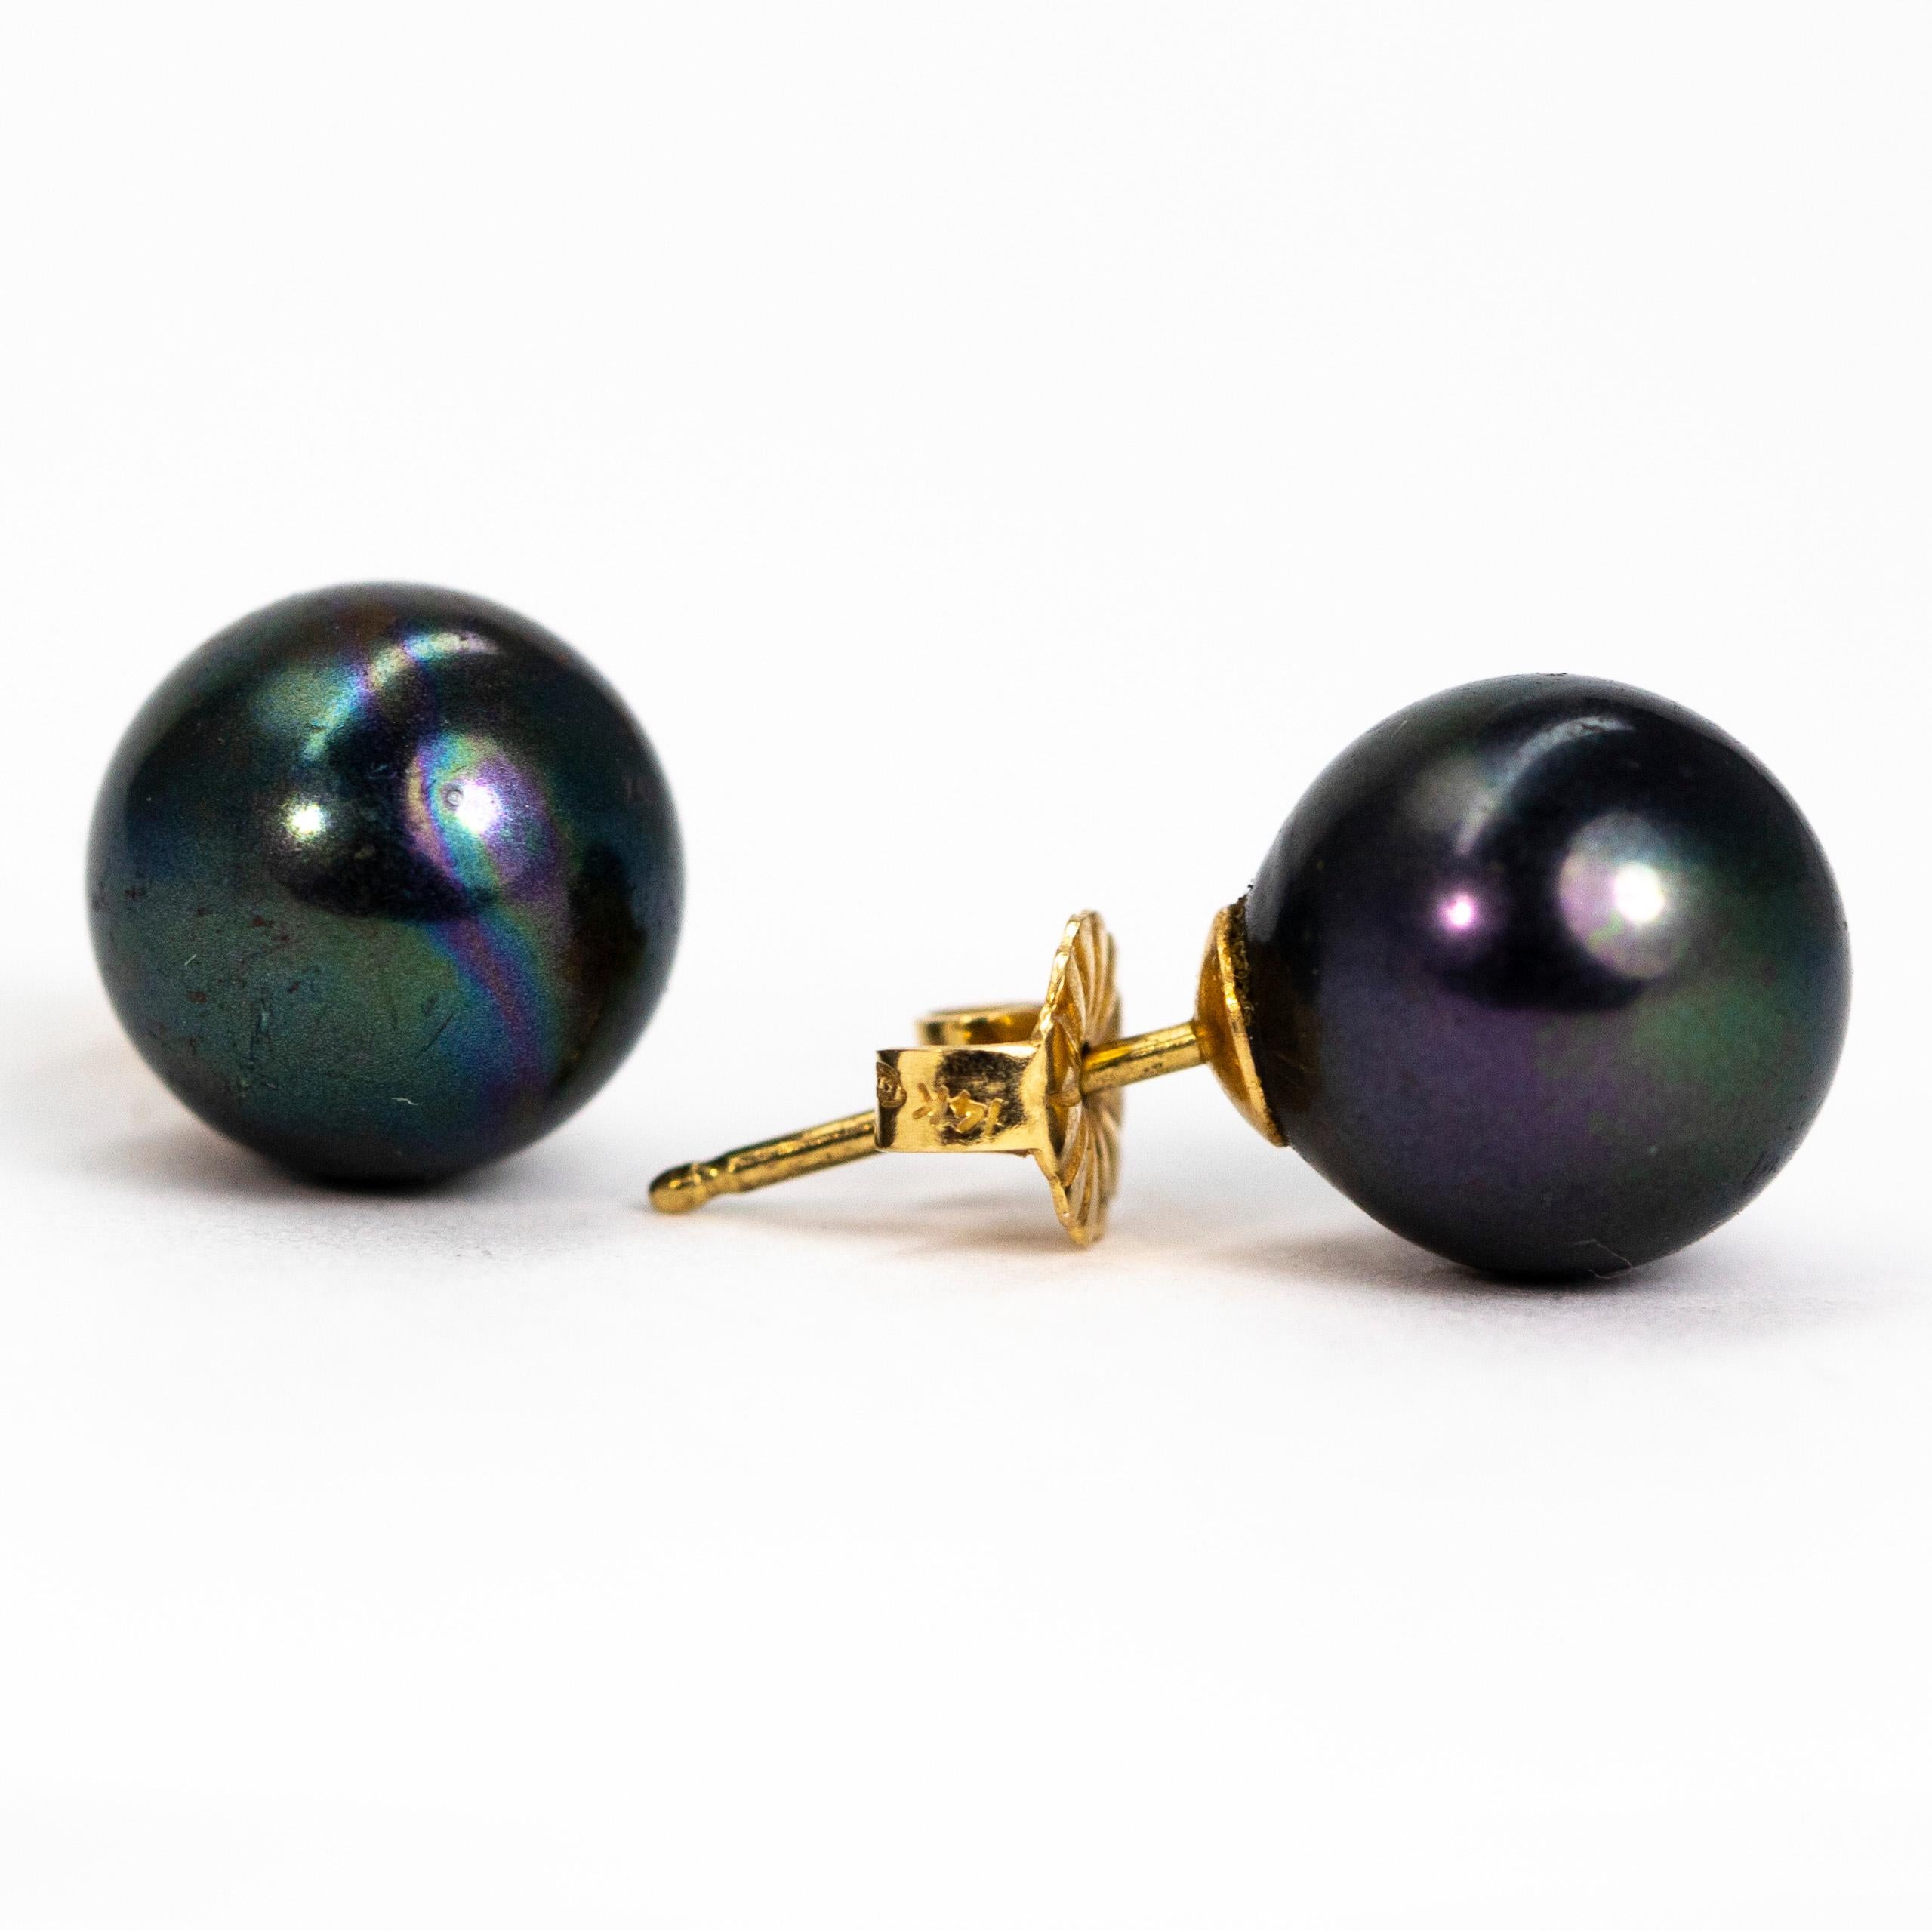 The colour of these pearls are simply stunning with all the different colours appearing in different light. They have a wonderful shimmer and glossy look to them. The are set upon 14ct gold studs.

Pearl Diameter: 10mm

Weight: 3g